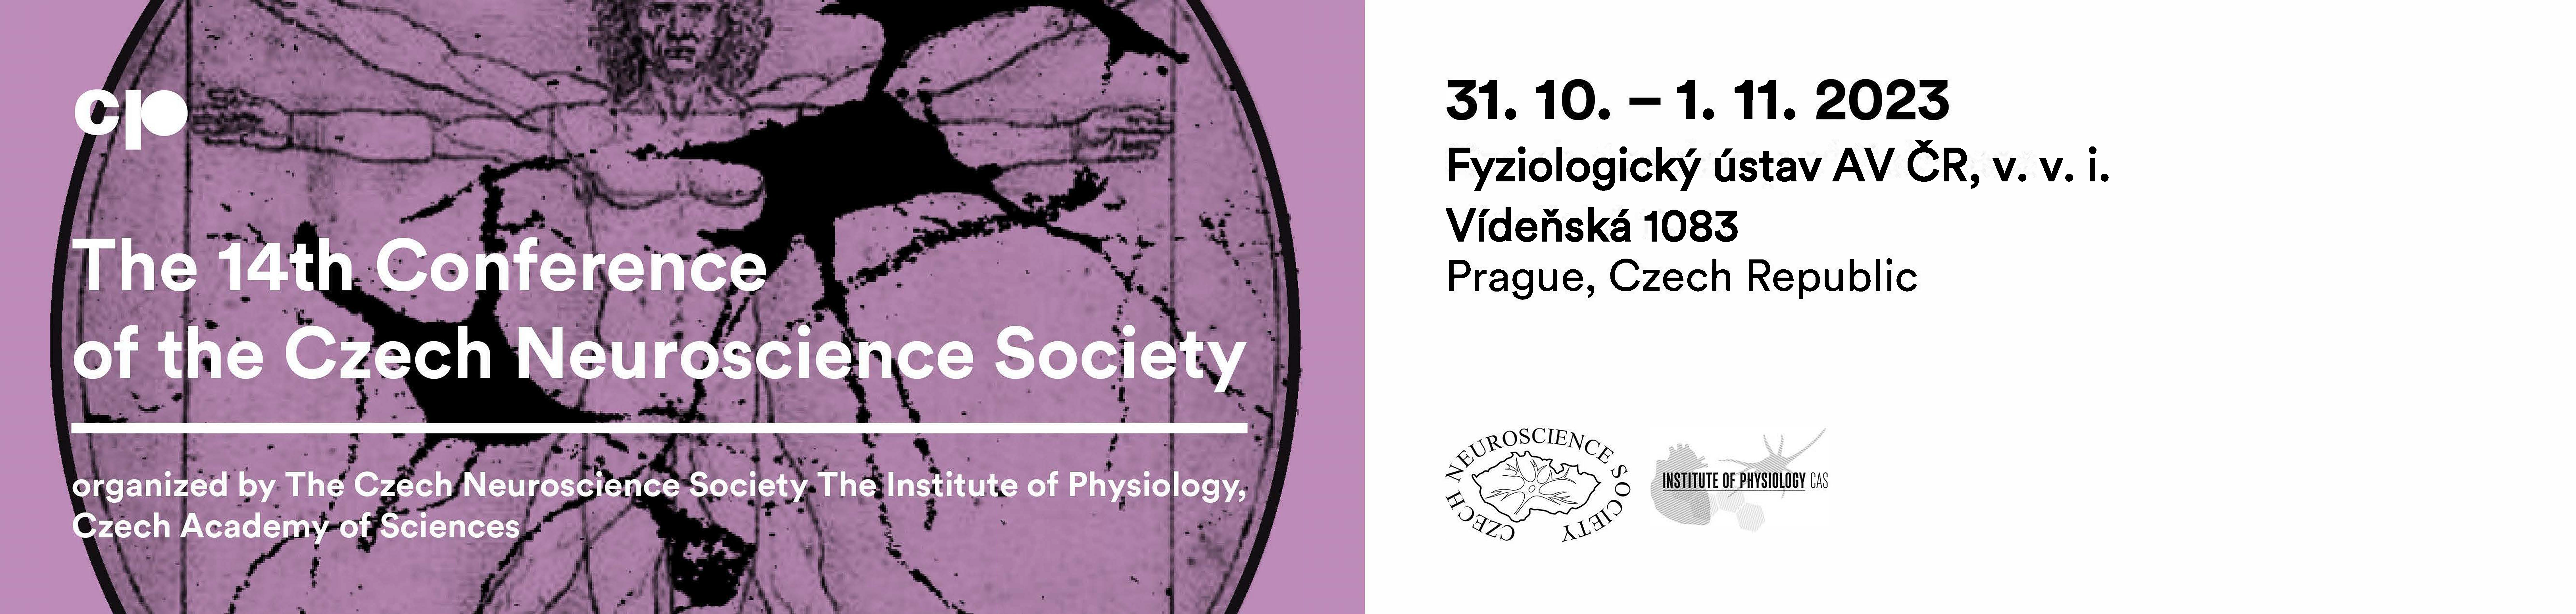 The 14th Conference of the Czech Neuroscience Society